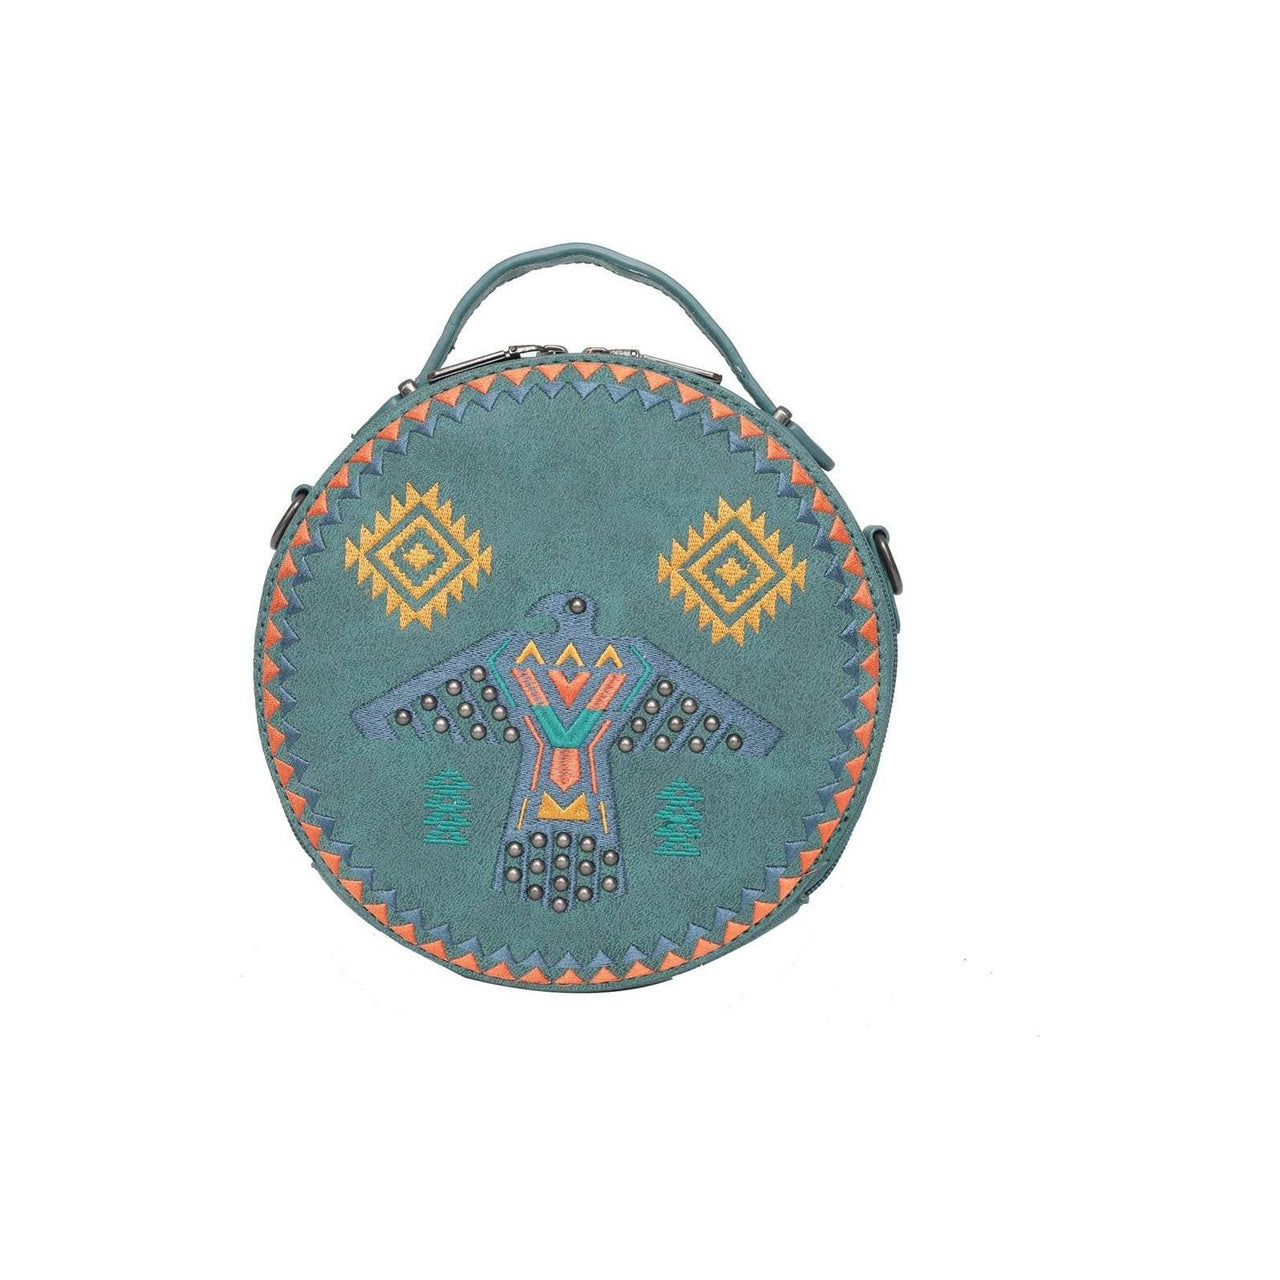 Wrangler Embroidered Collection Circle Bag/Crossbody Purses\Wallets Sweet Southern Soul Boutique Turquoise Default 